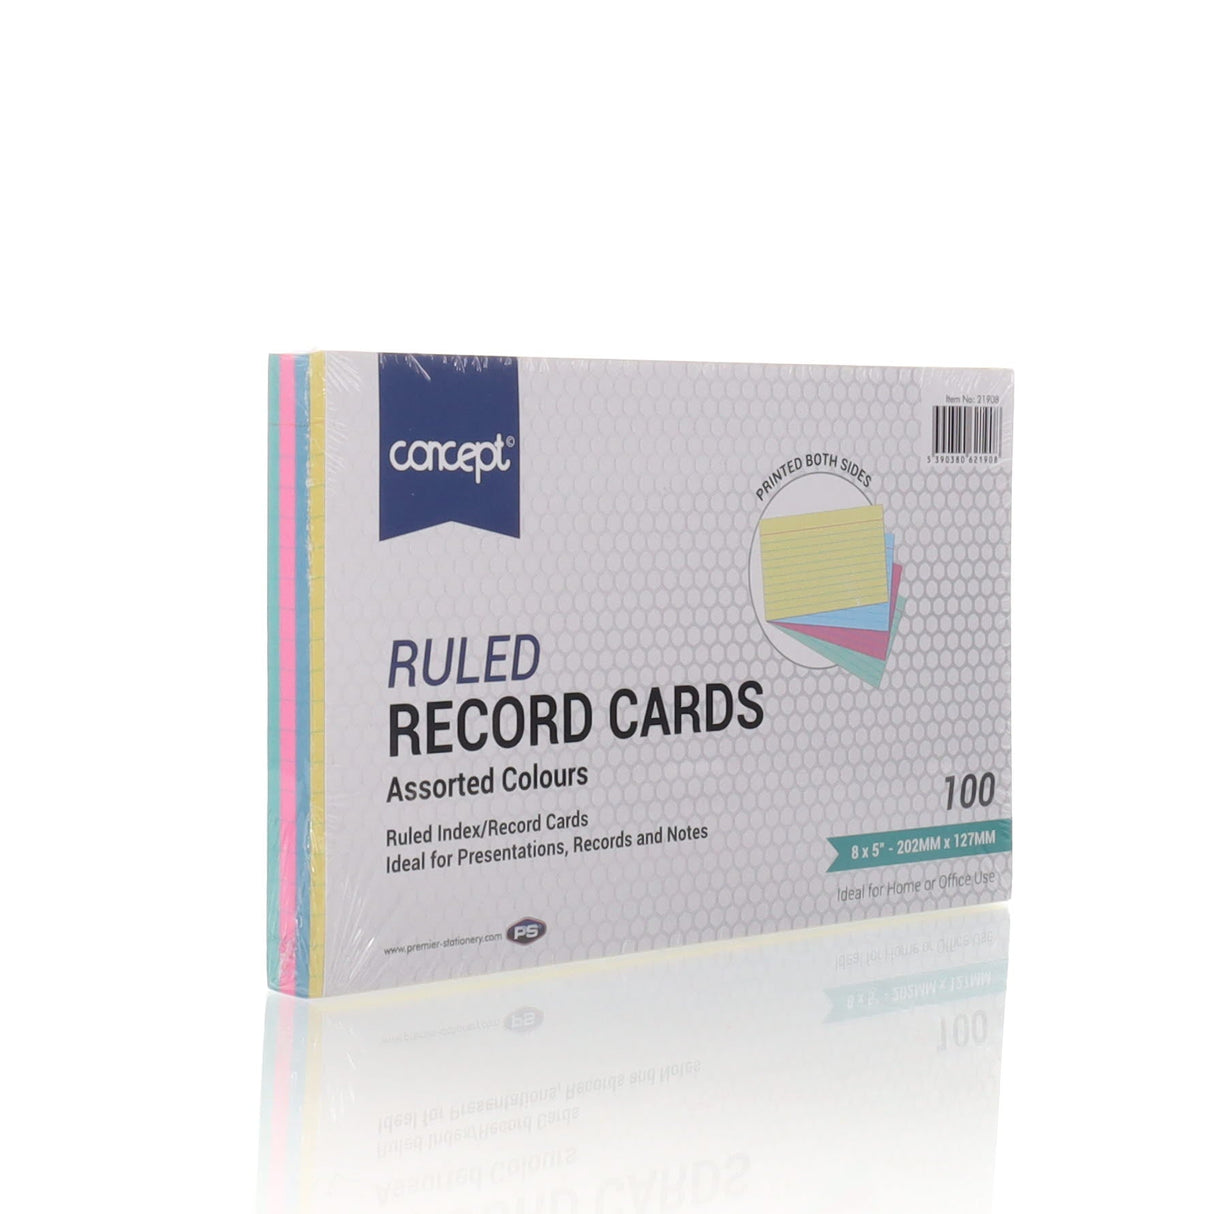 Concept 8 x 5 Ruled Record Cards - Colour - Pack of 100 | Stationery Shop UK